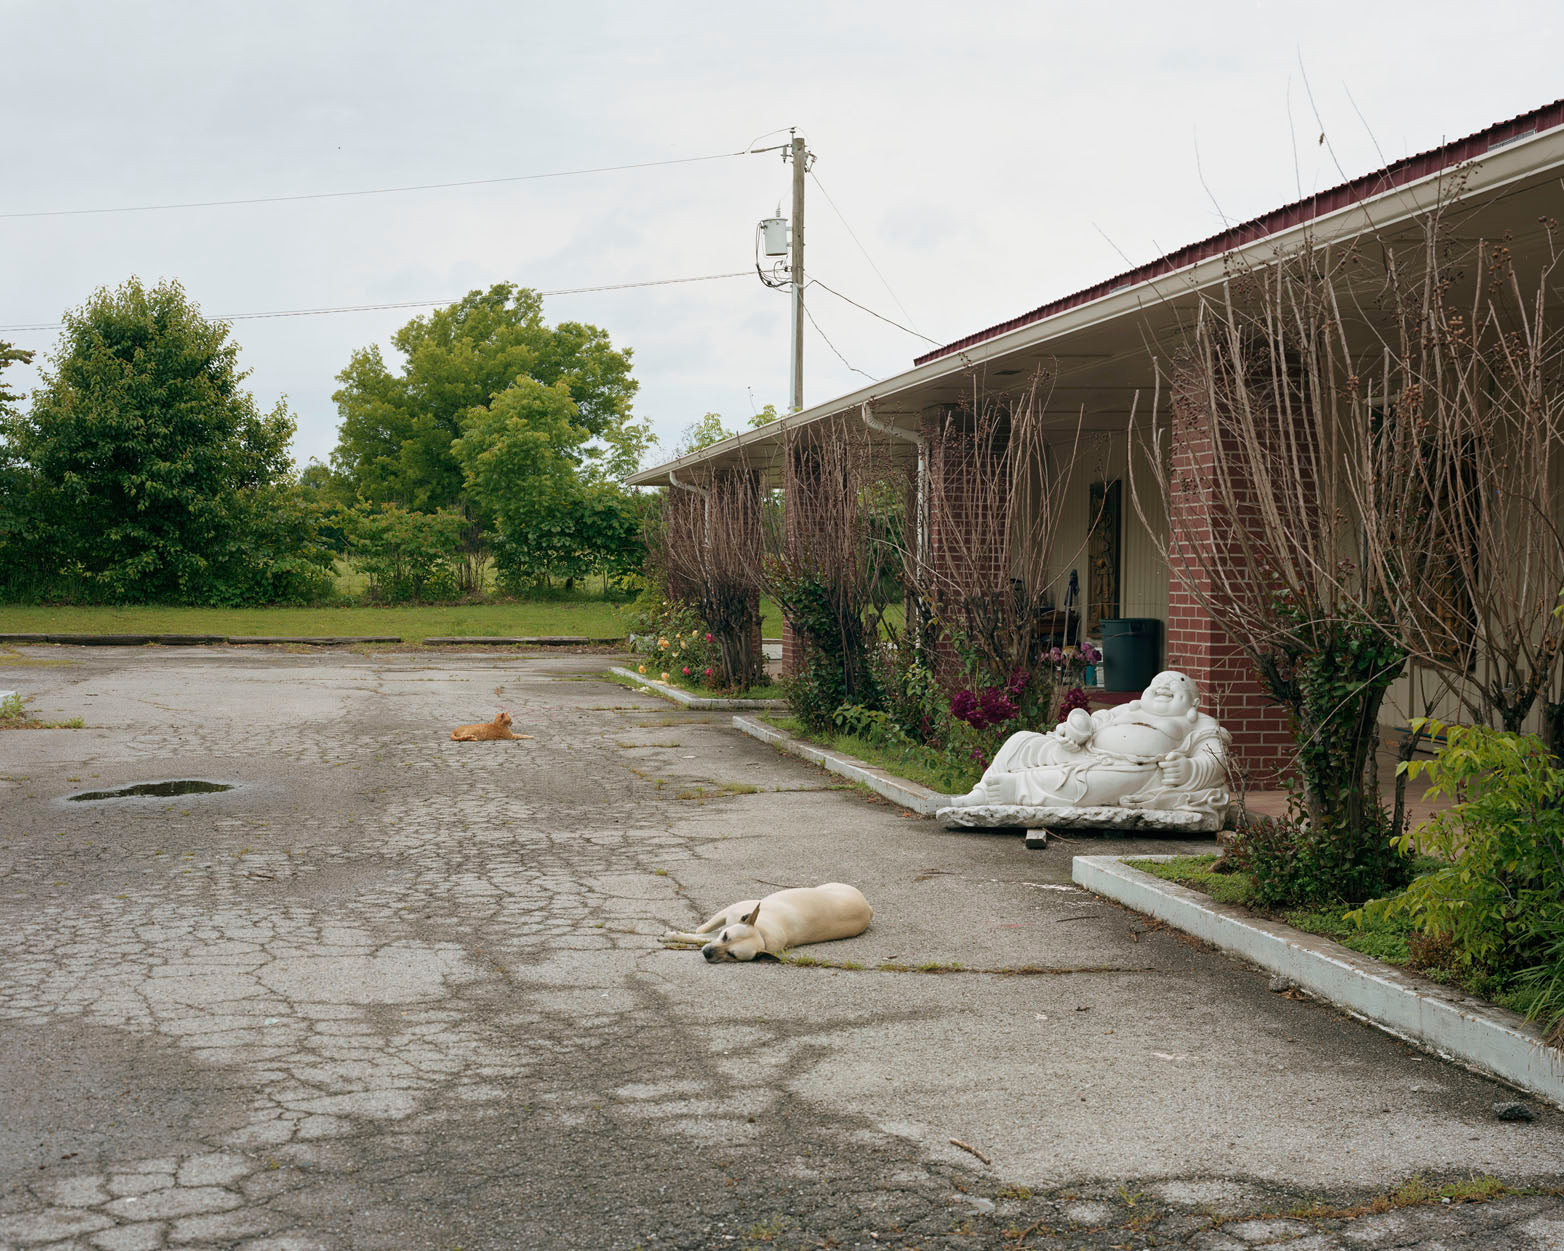 Alec Soth — A Pound of Pictures